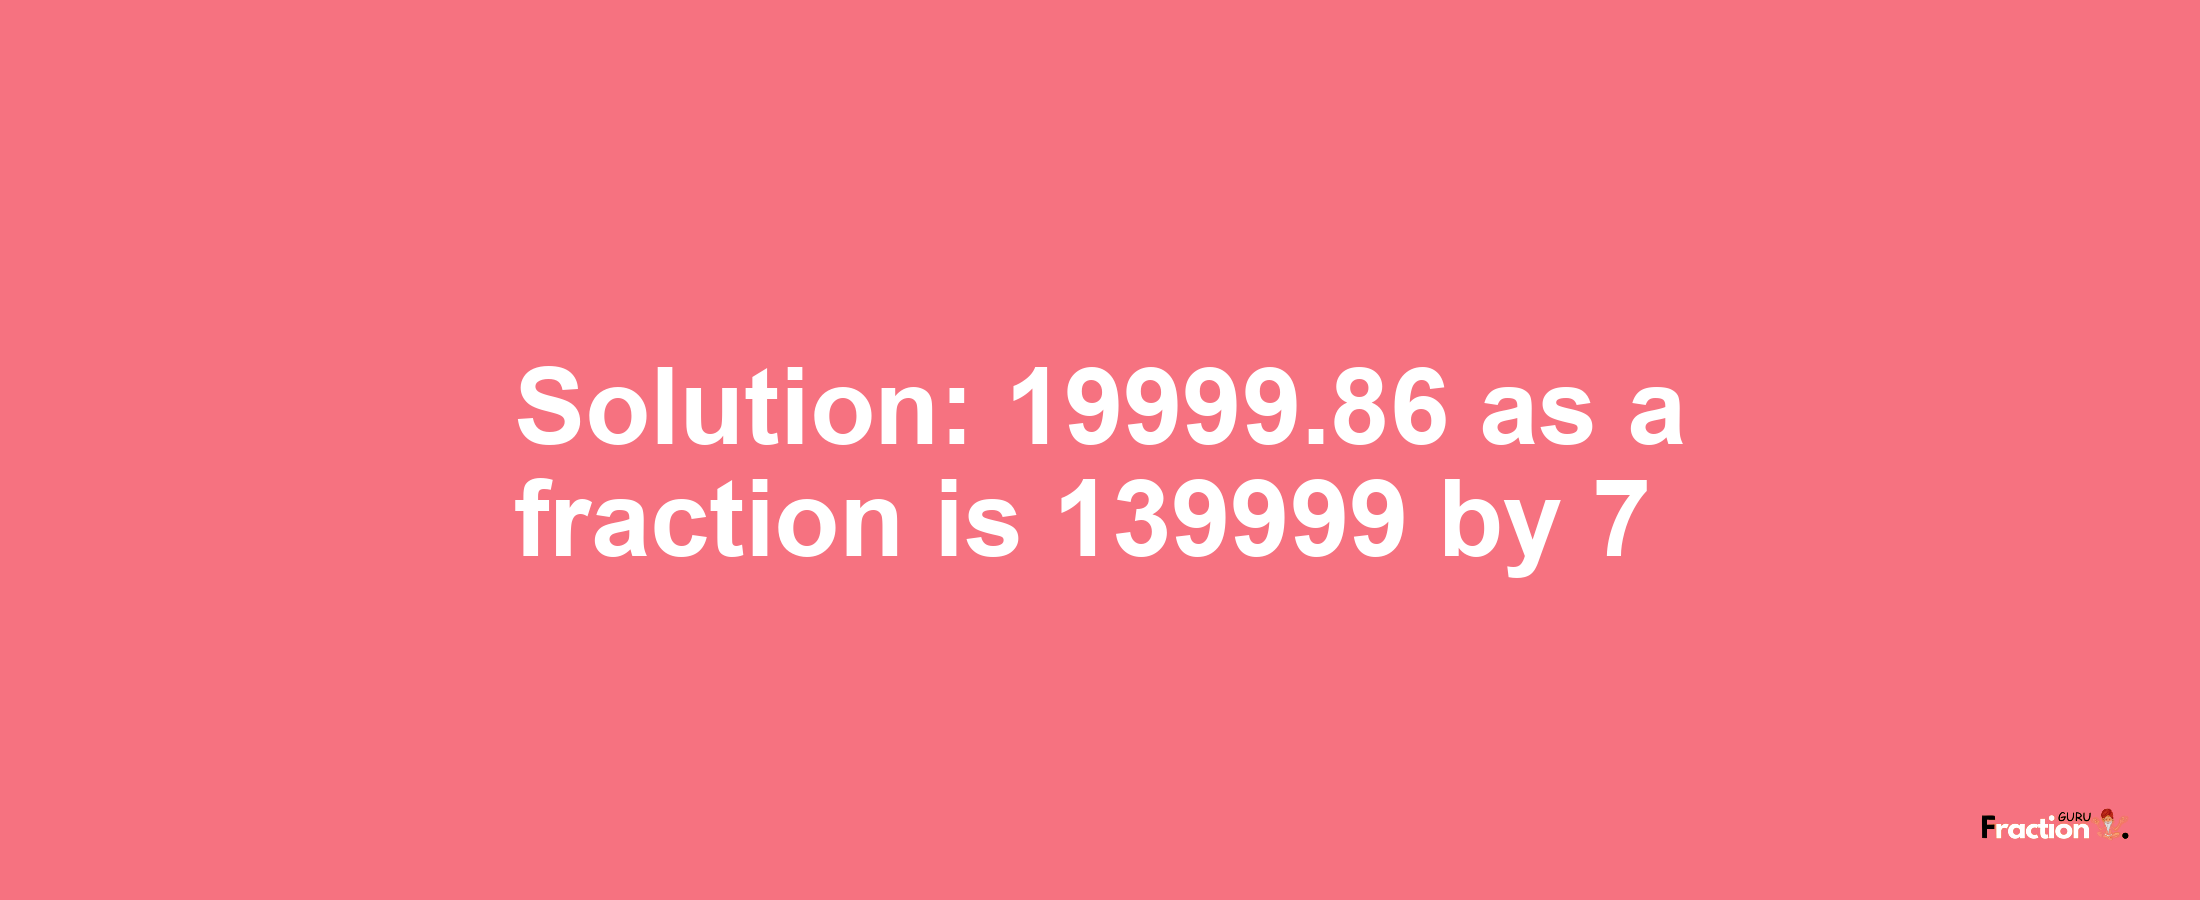 Solution:19999.86 as a fraction is 139999/7